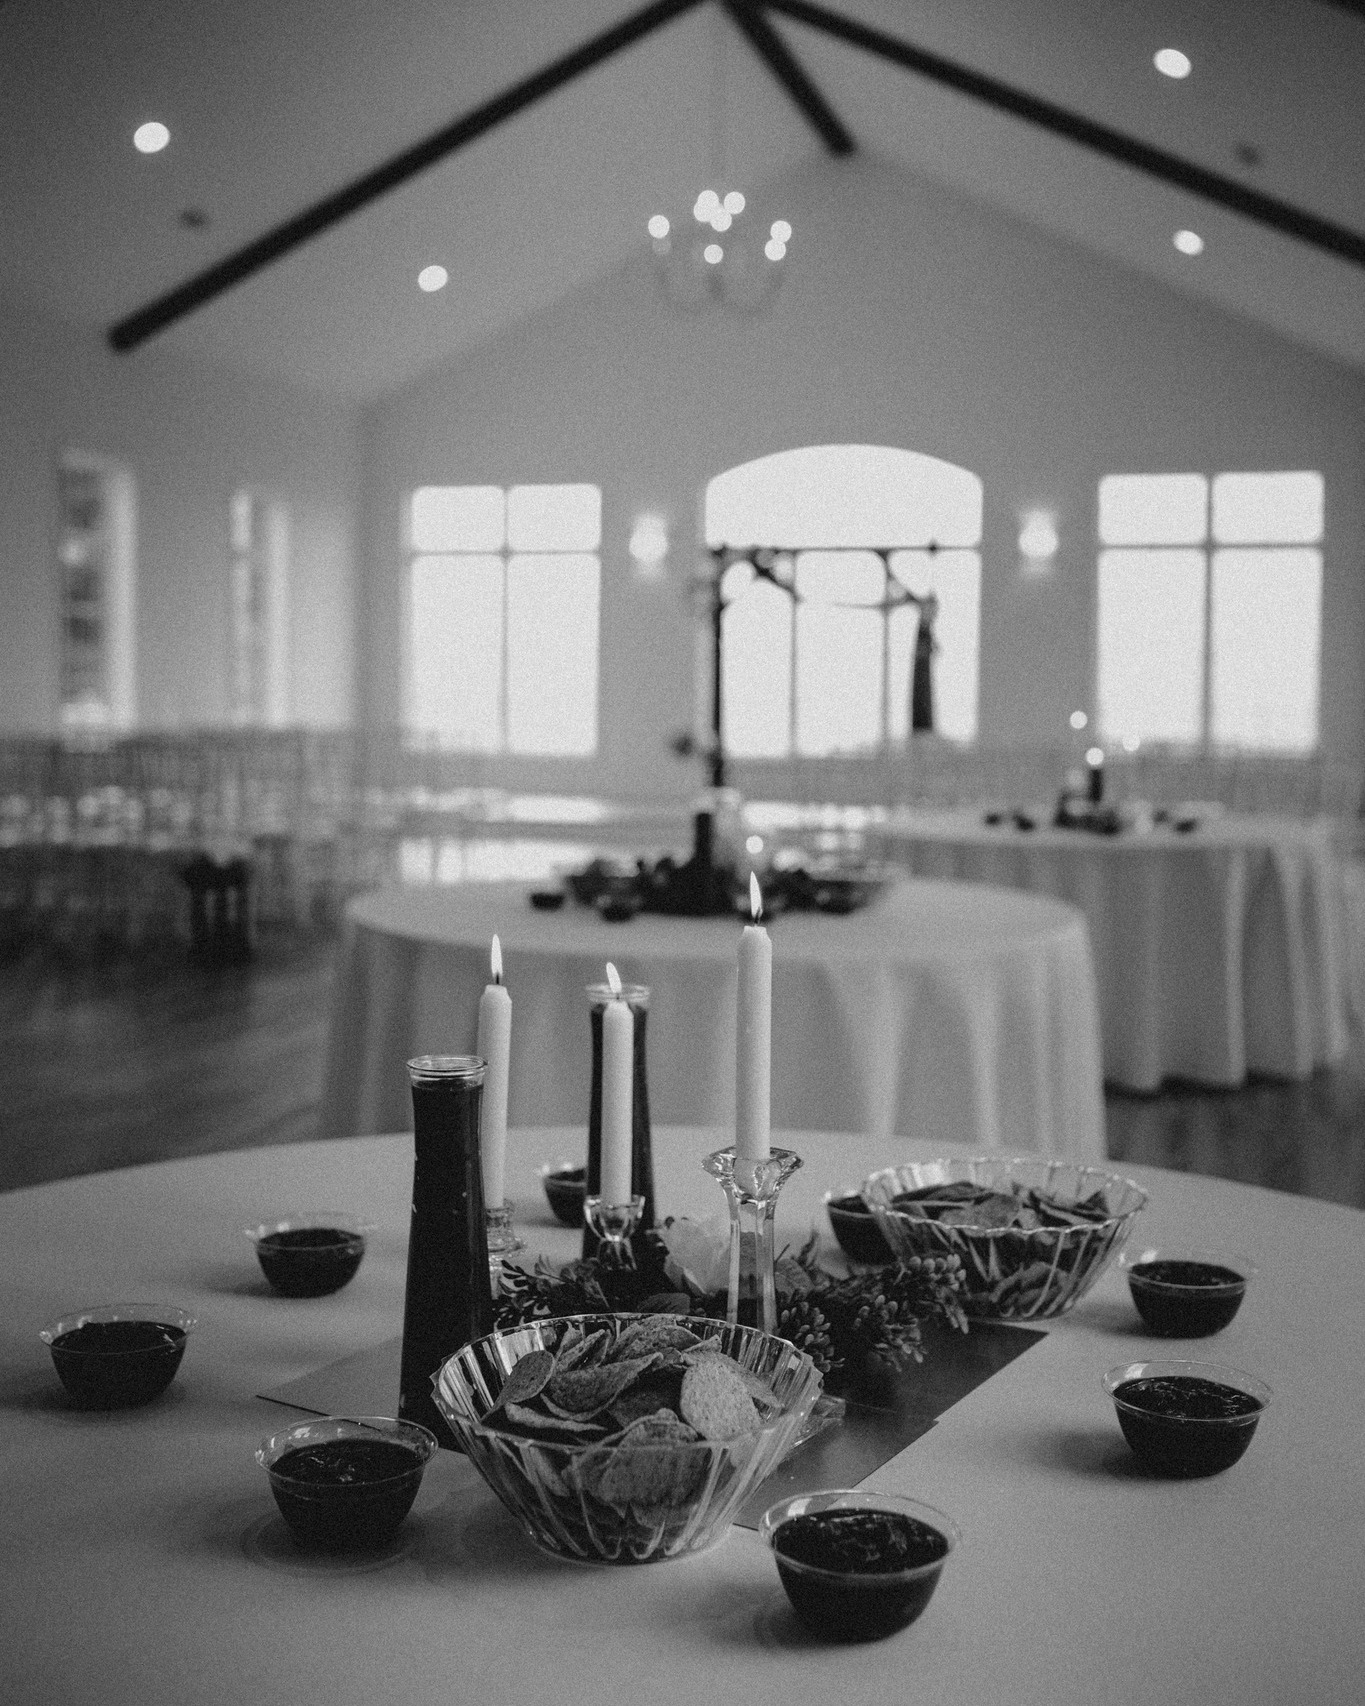 A beautifully decorated wedding venue with Winchester KY Wedding photographer capturing the moment.